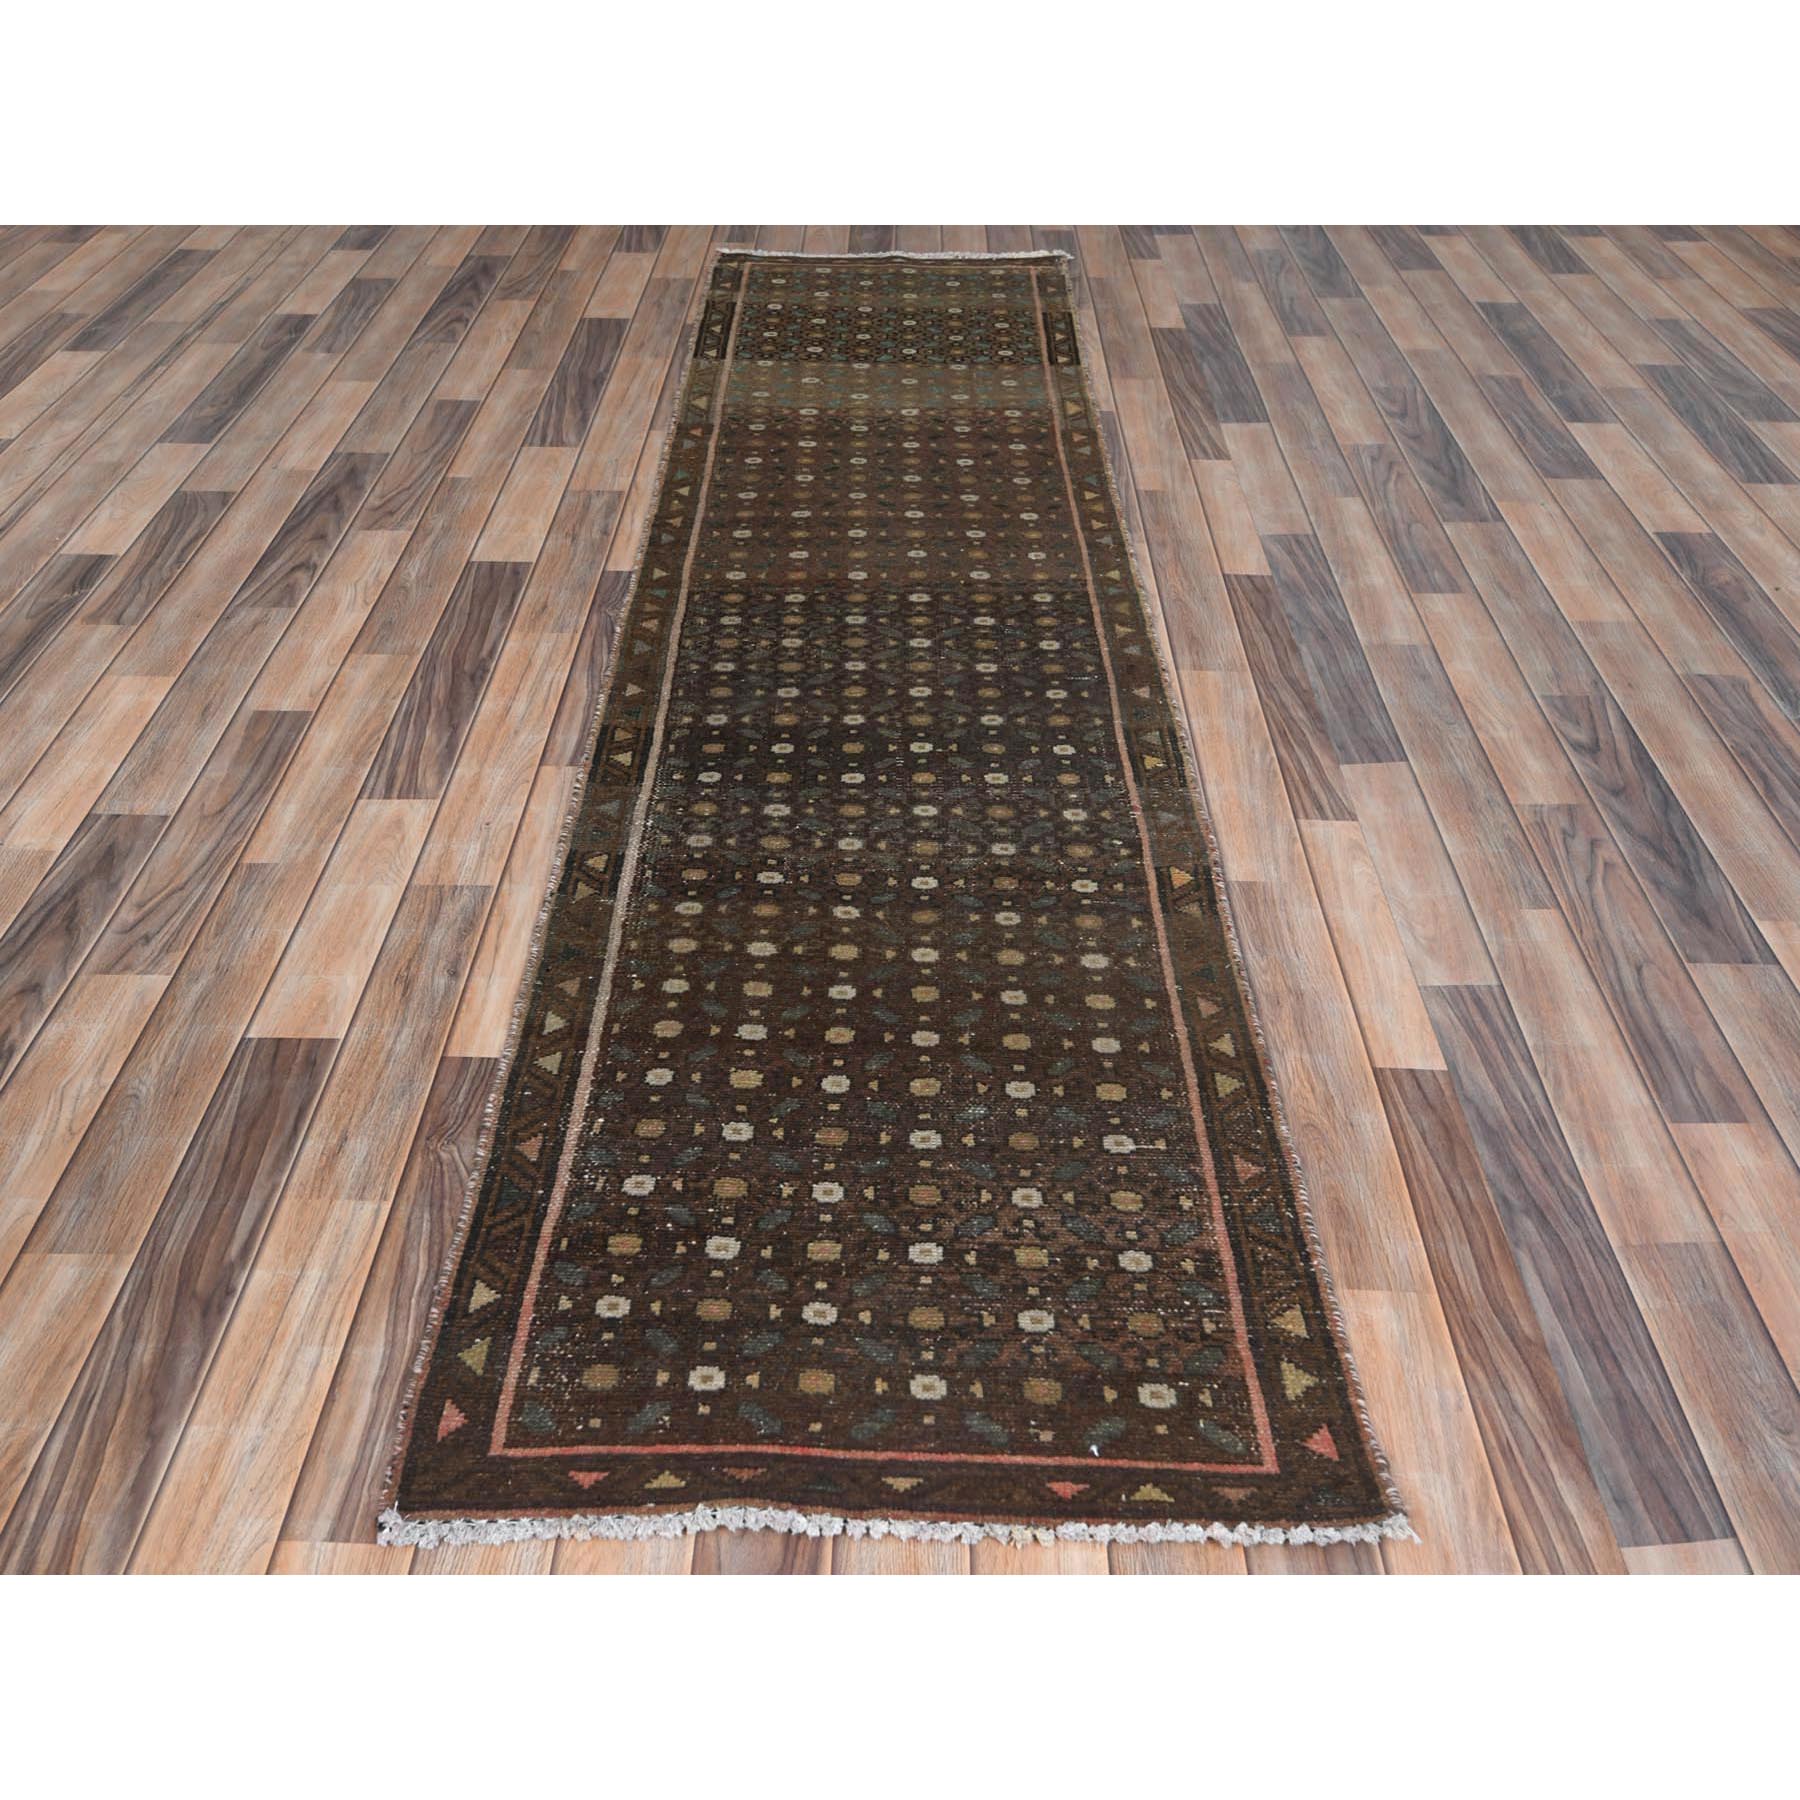 2'4"x9'2" Chocolate Brown, Abrash, Vintage Persian Hamadan with All Over Repetitive Design, Hand Woven, Pure Wool, Worn Down, Distressed Look Narrow Runner Oriental Rug 